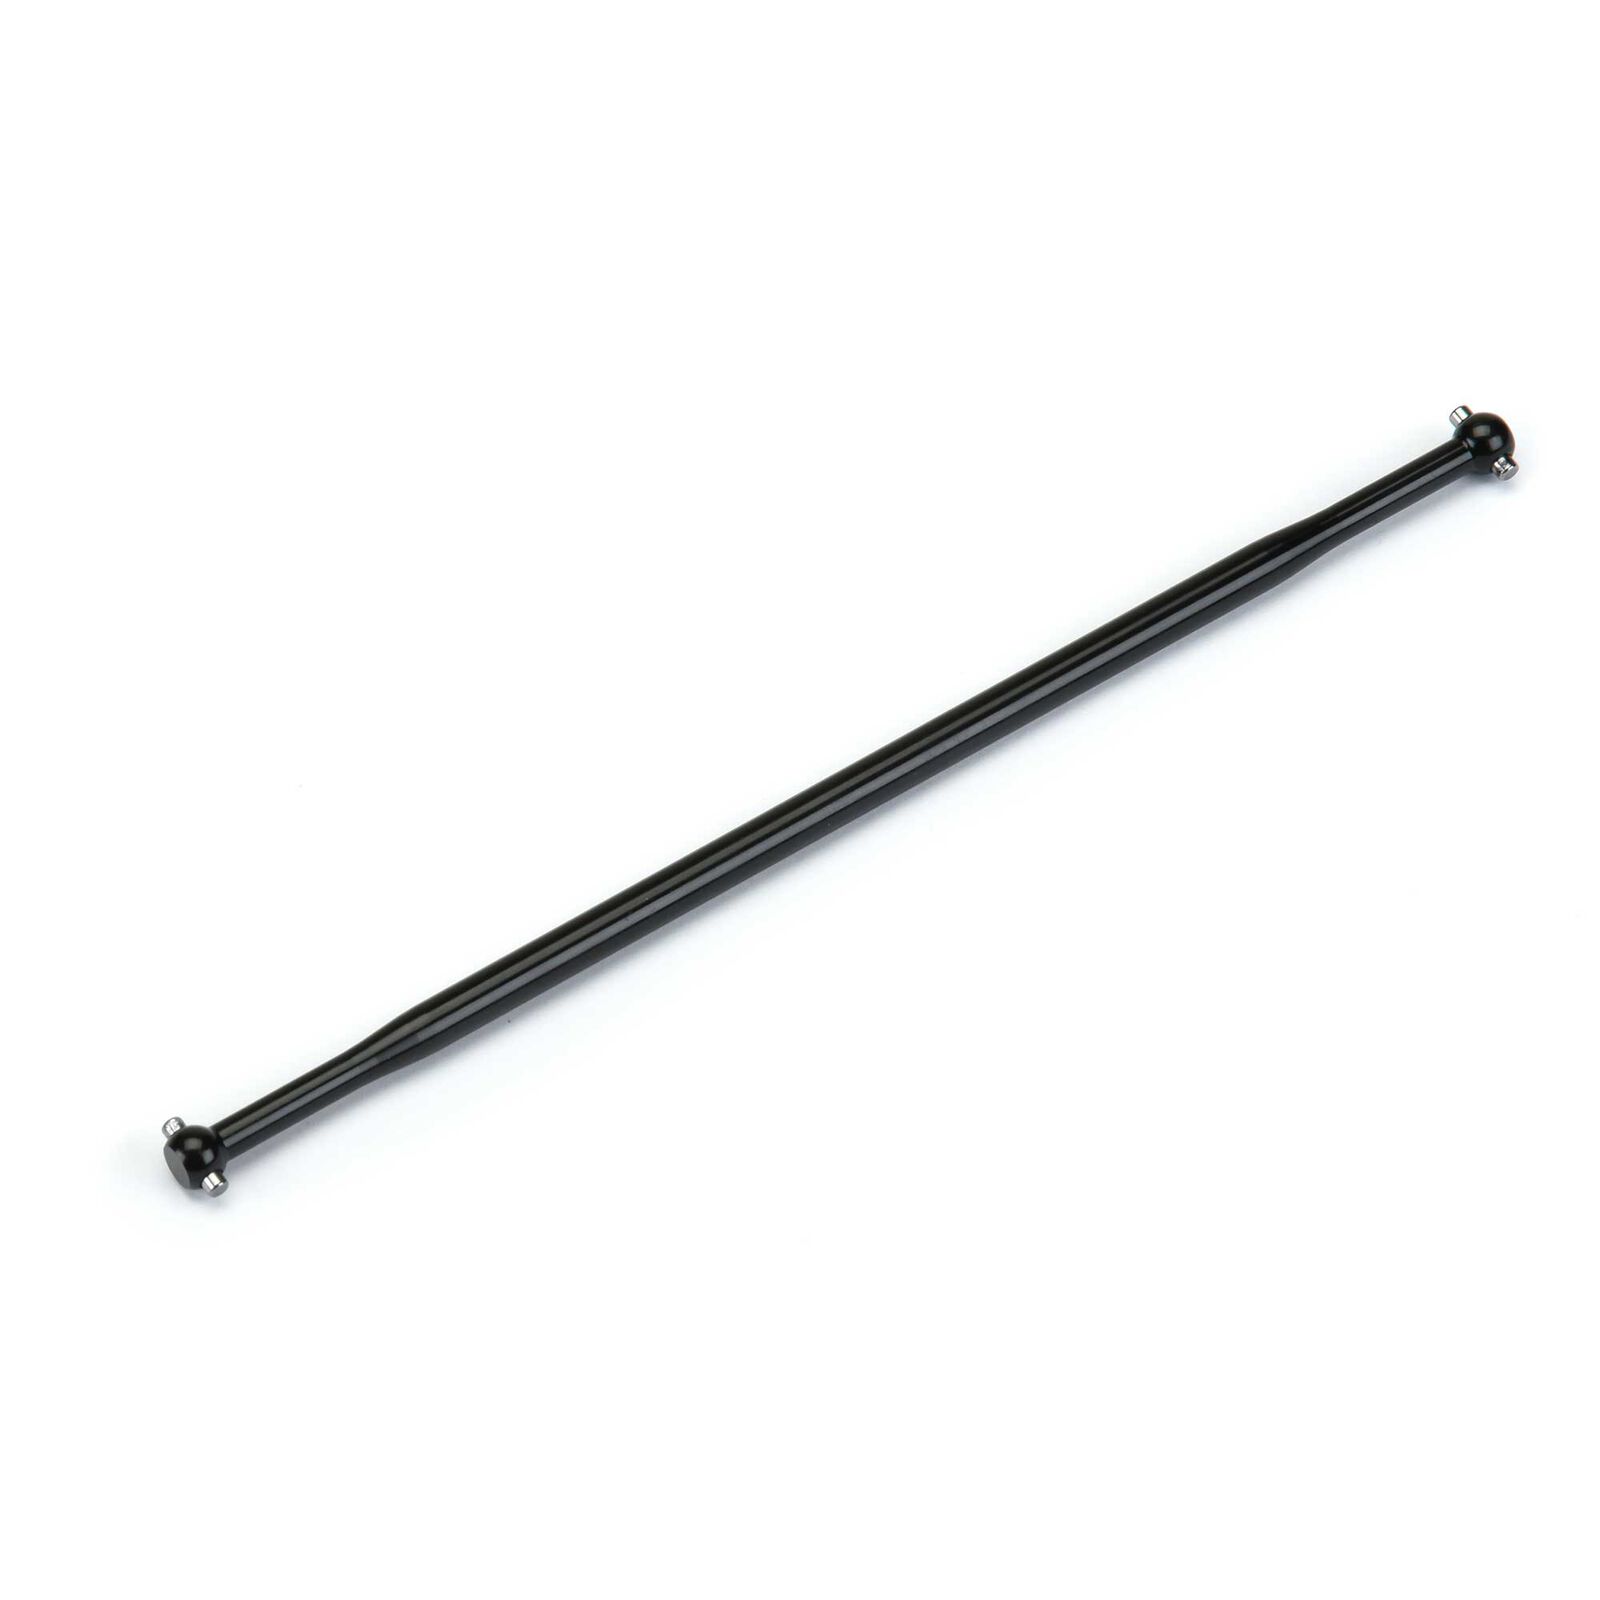 Replacement Center Rear Driveshaft: PRO-Fusion SC 4x4